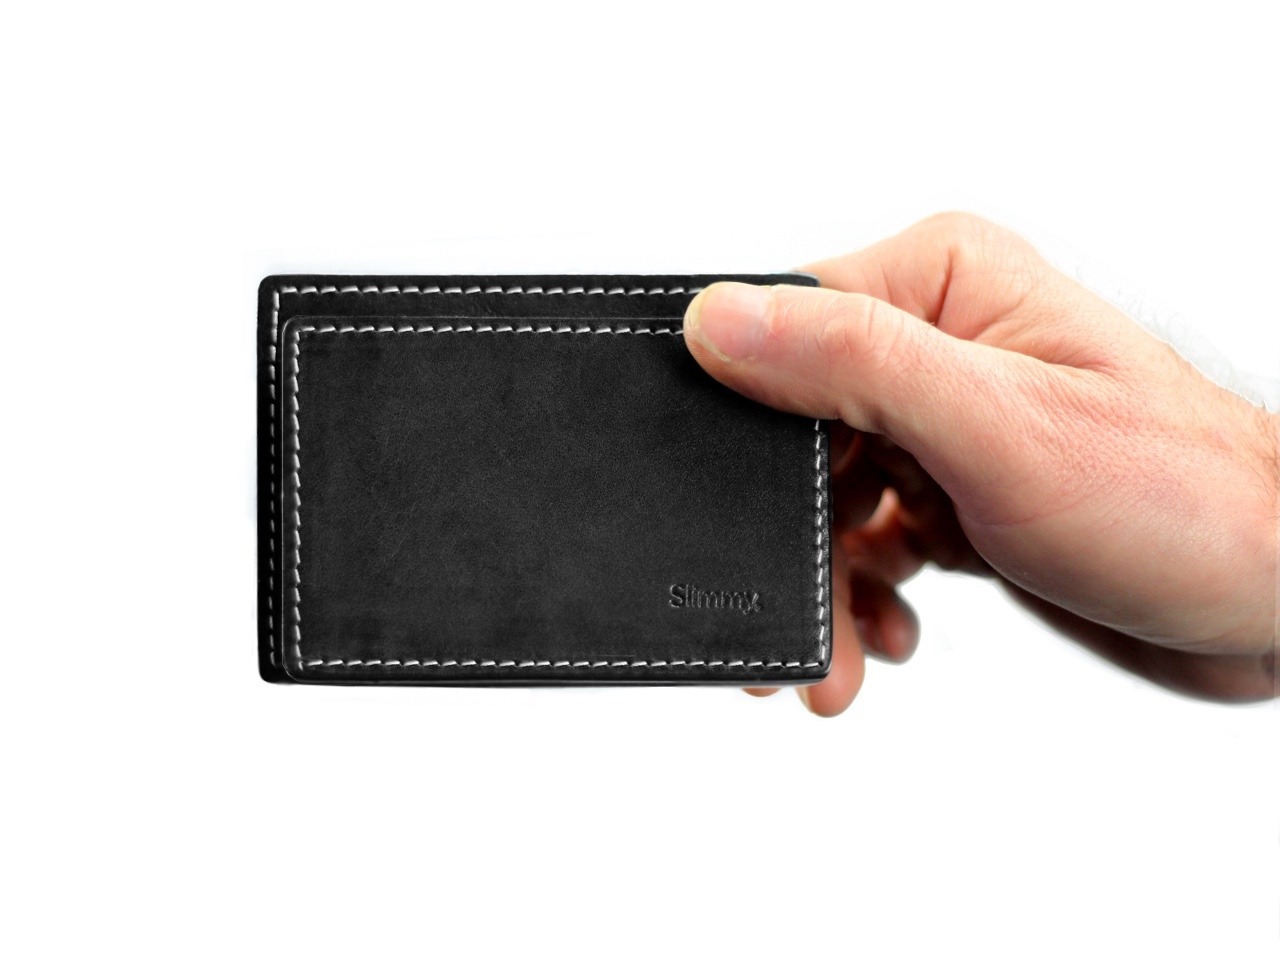 The Mini Copper of Wallets - Slimmy